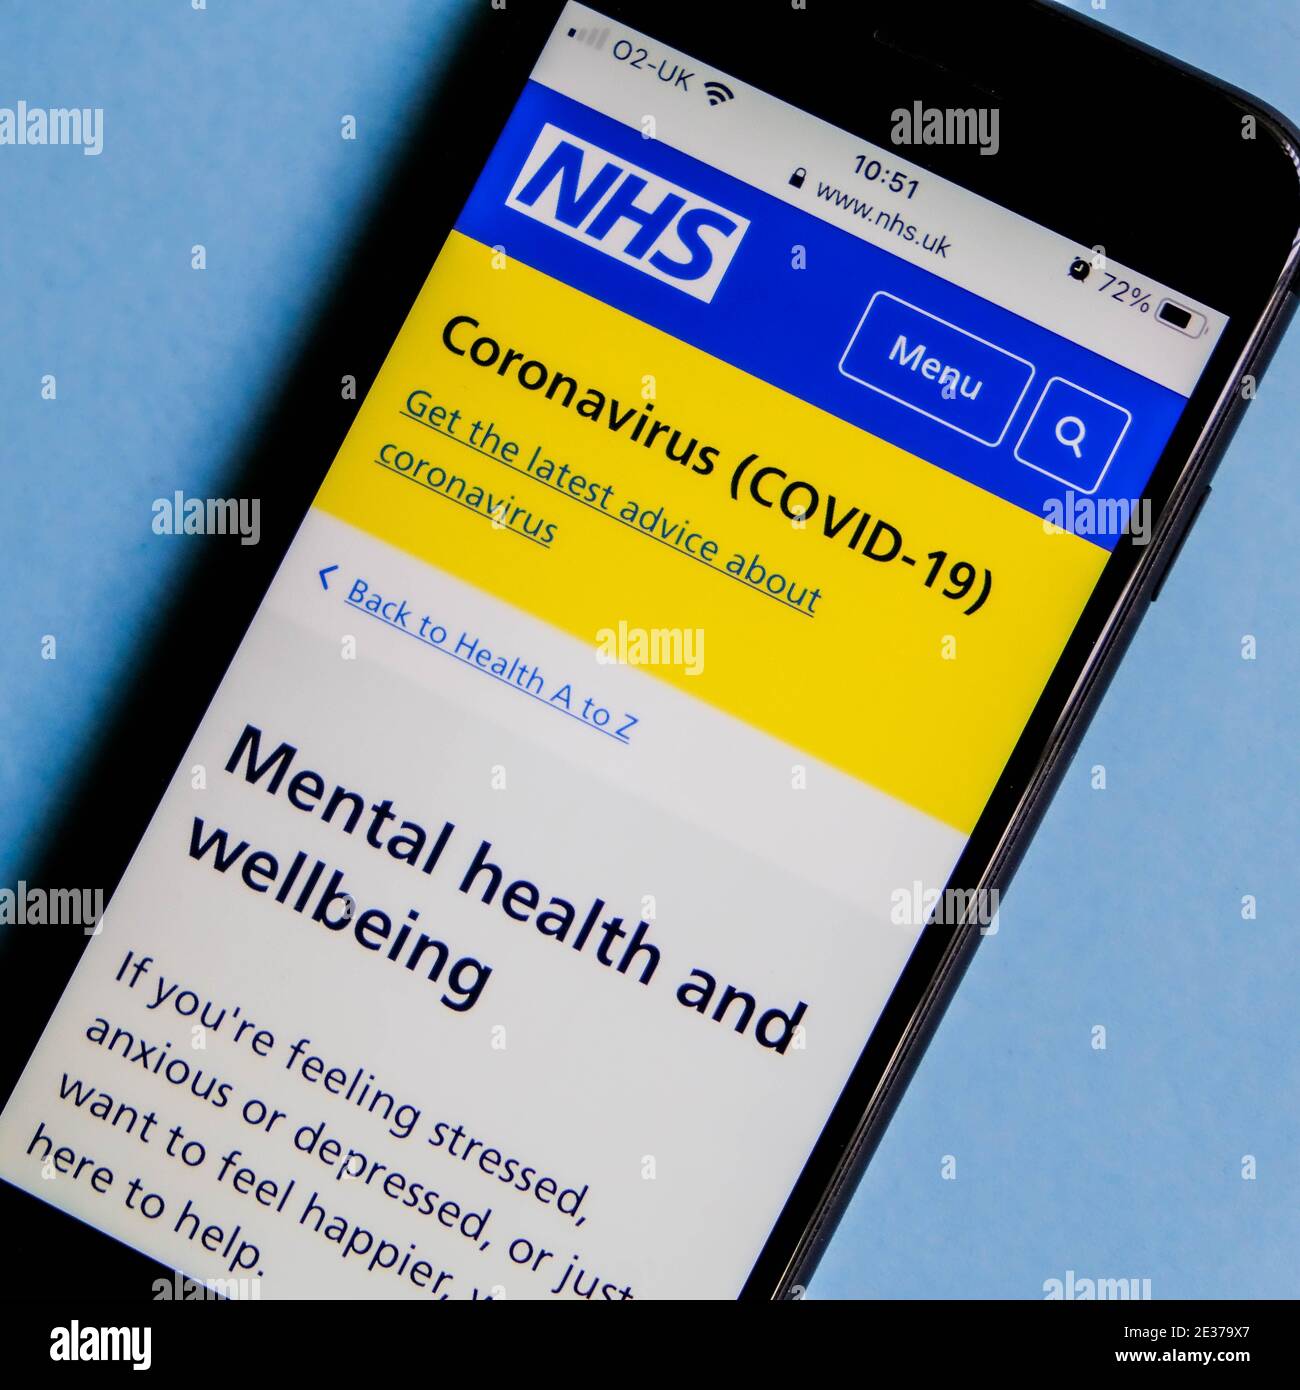 London UK, January 17 2021, NHS App Mobile Or Smart Phone Screenshot For Mental Health And Wellbeing During Covid-19 Pandemic Stock Photo